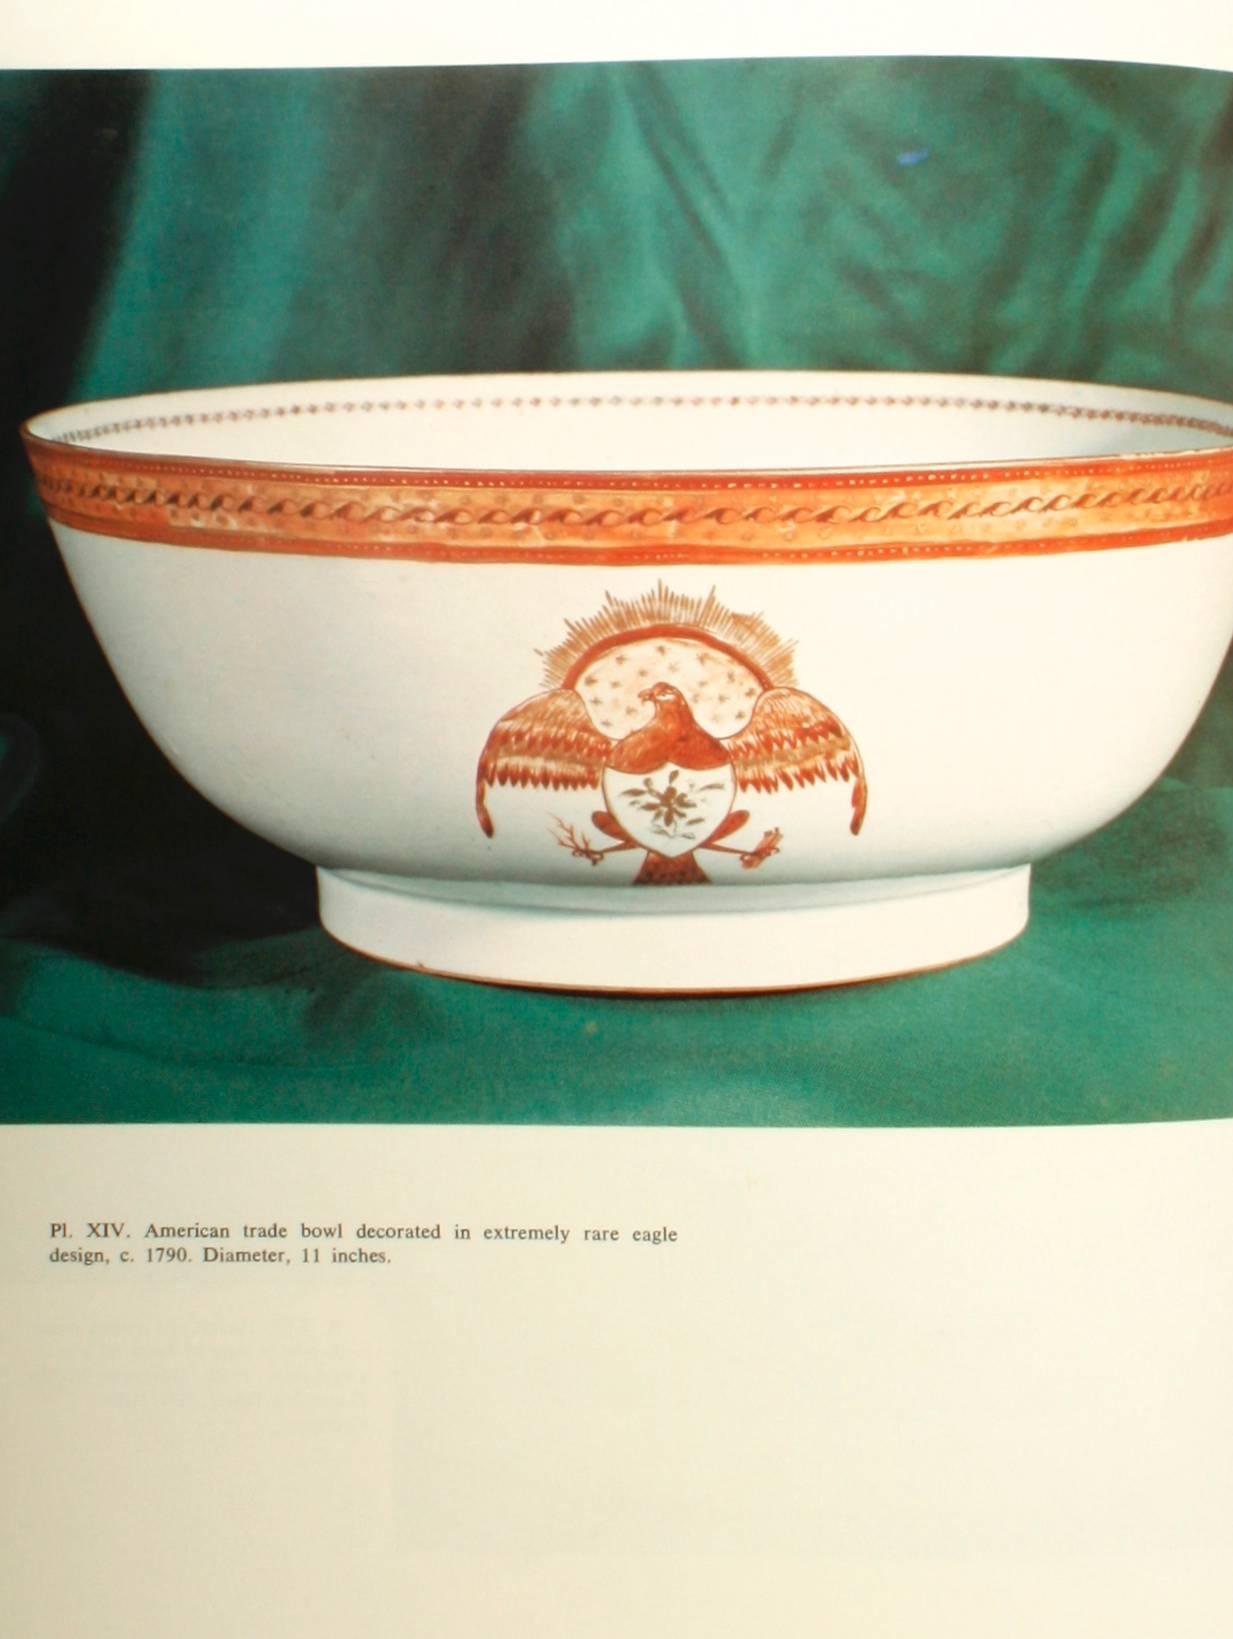 Chinese Export Porcelain: An Historical Survey by Elinor Gordon First Edition For Sale 2